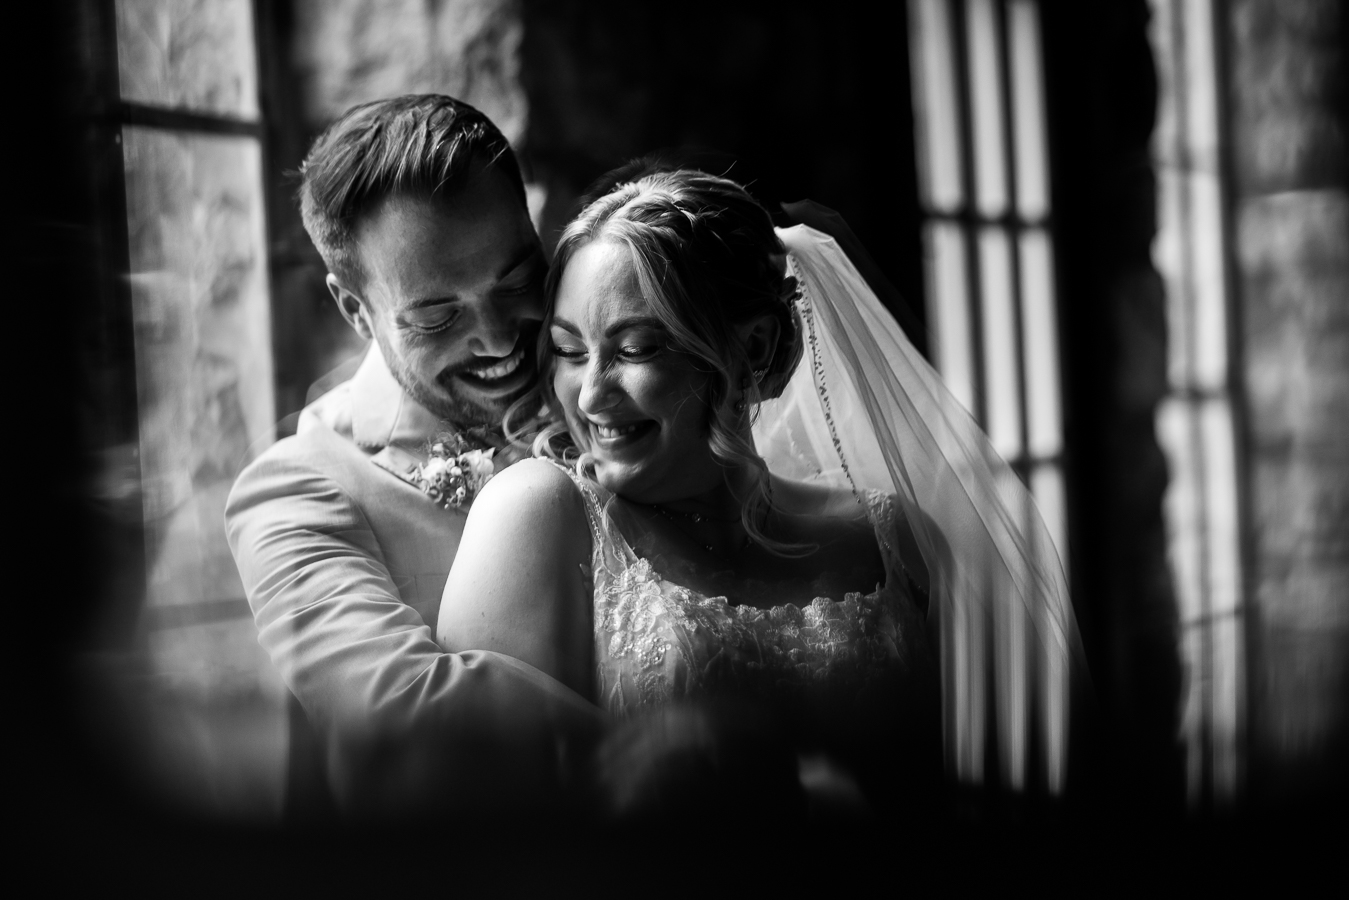 Holly Hedge Estate Wedding Photographer, lisa rhinehart, captures this unique, creative black and white image of the bride and groom hugging one another and smiling captured through the piano glass